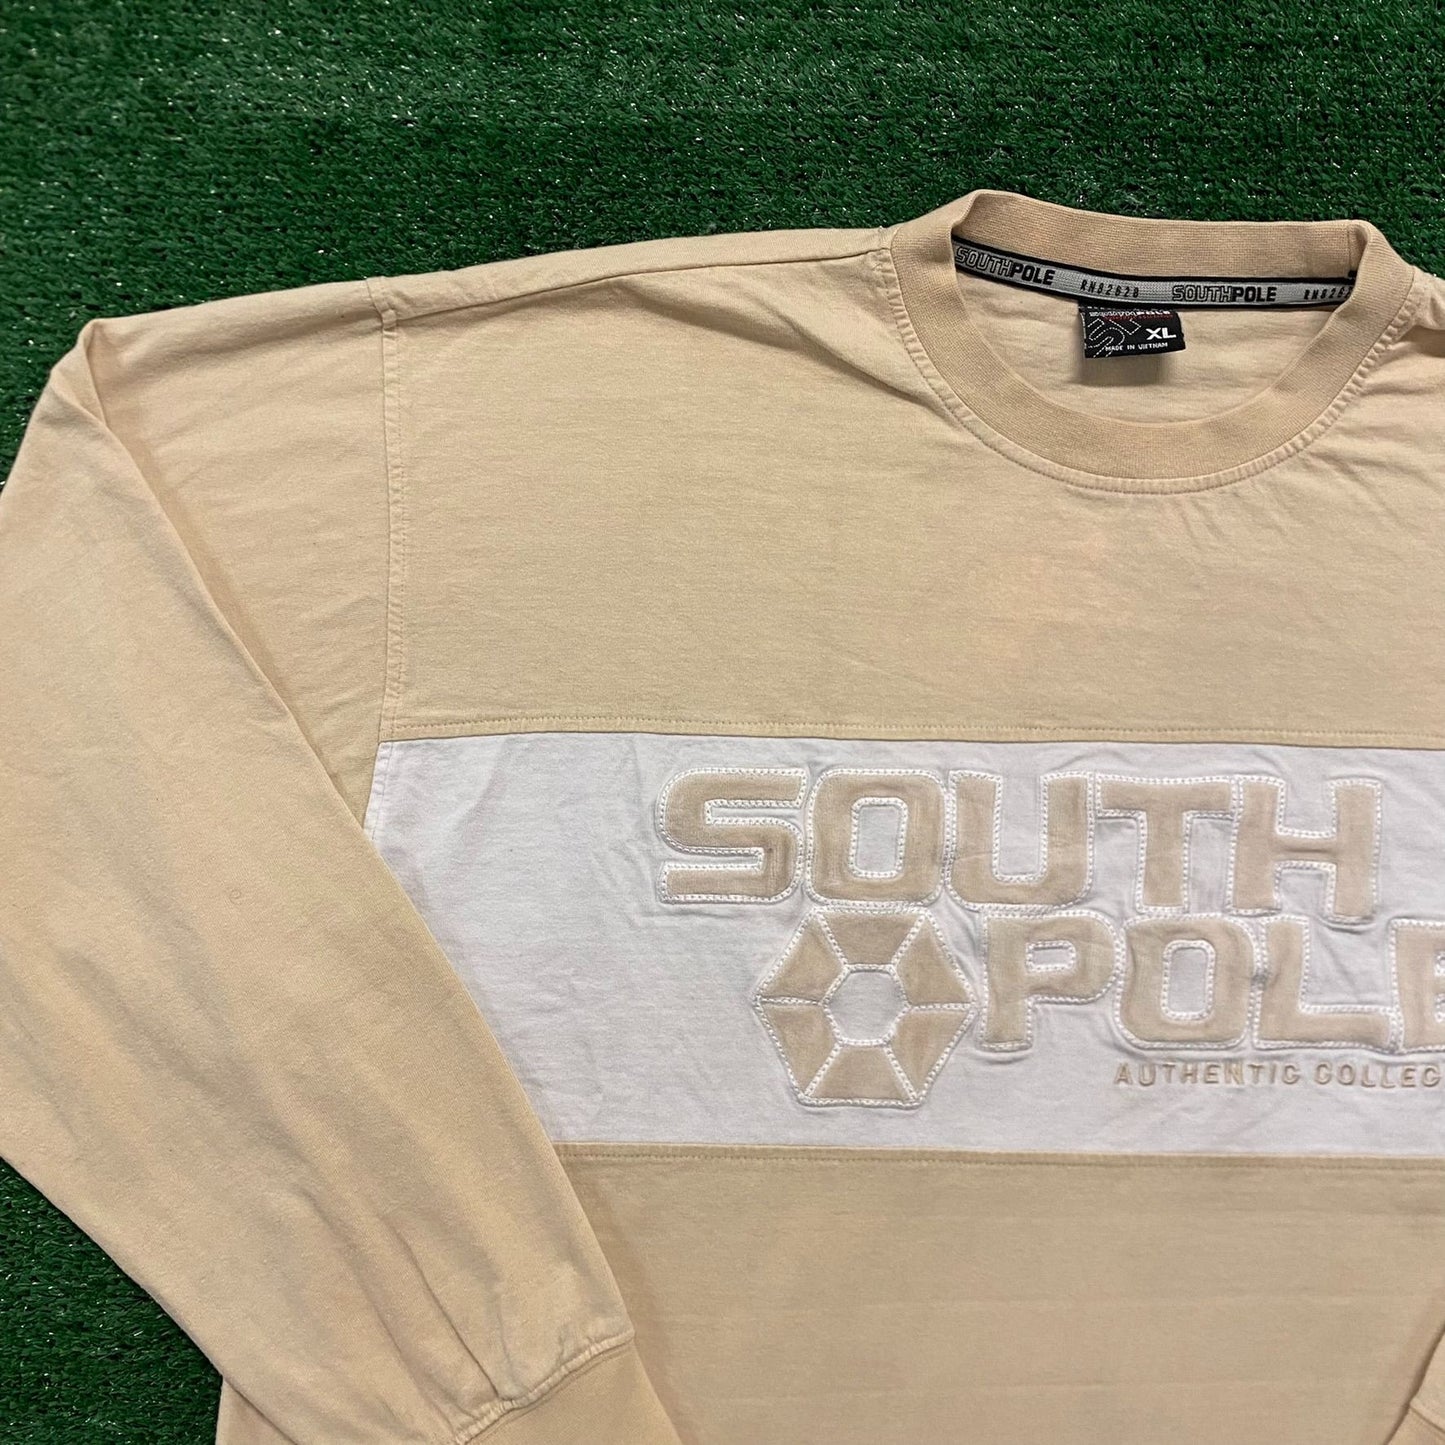 South Pole Embroidered Spell Out Vintage Y2K T-Shirt